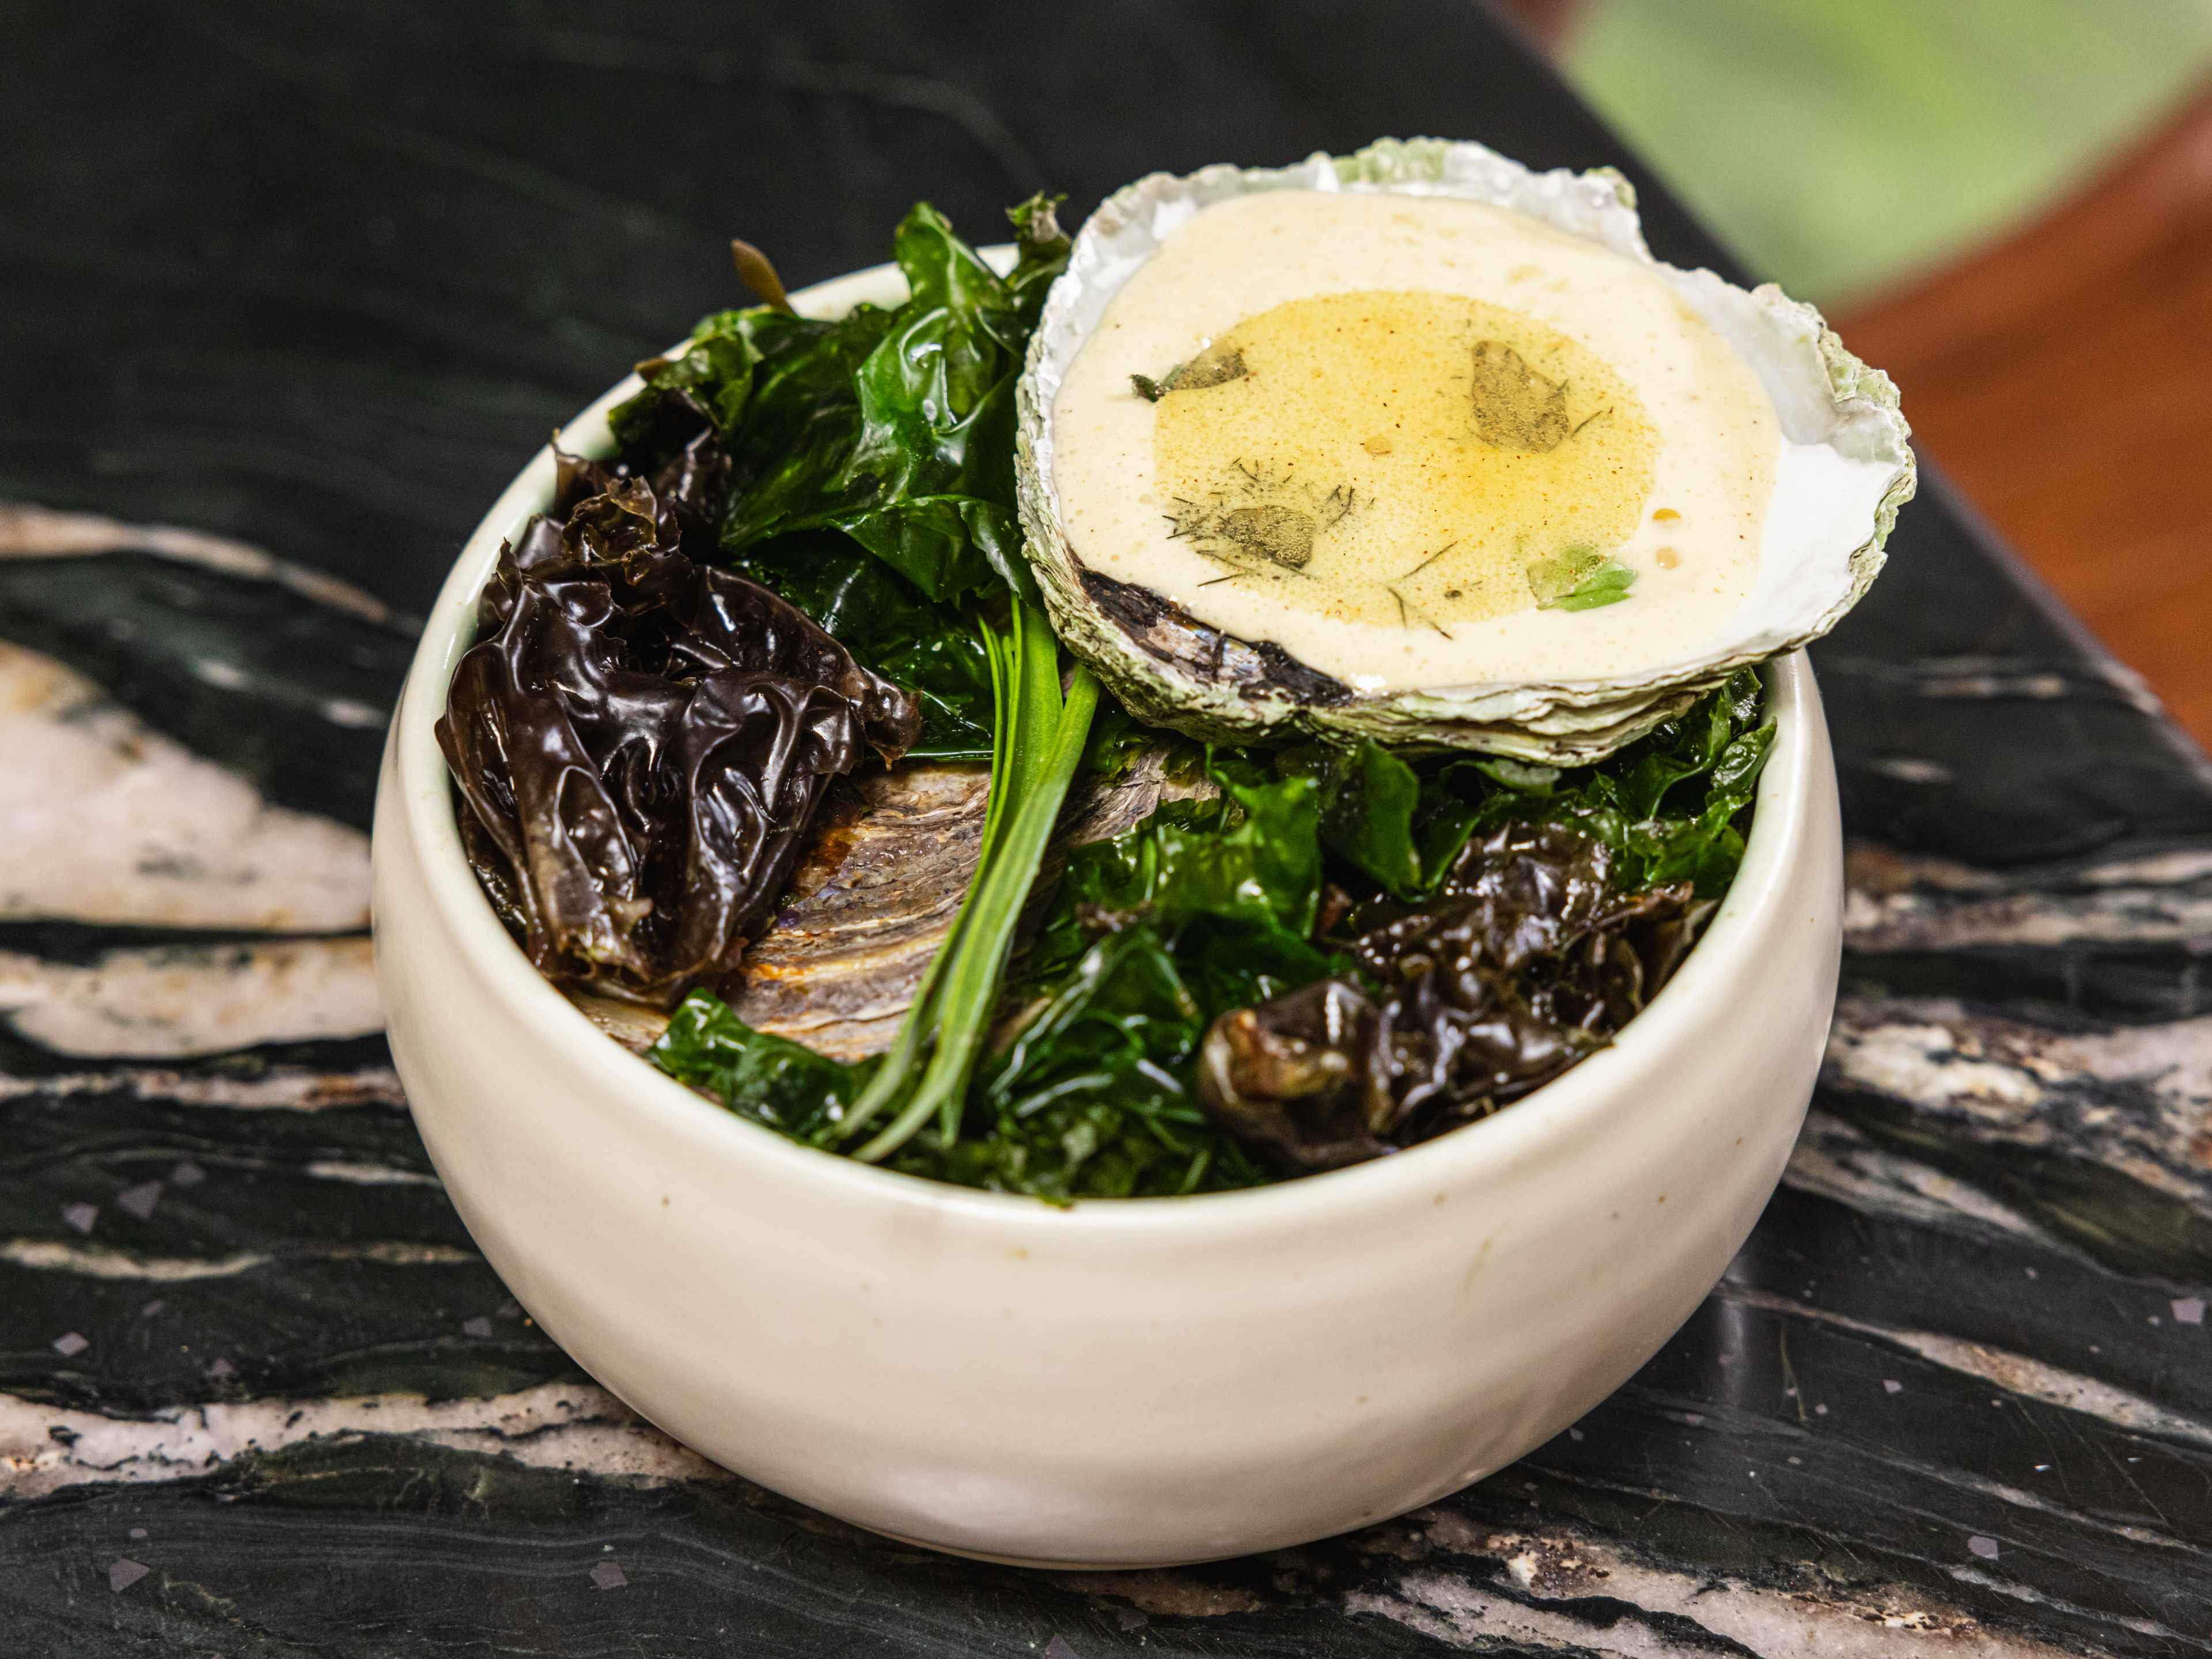 A belon oyster on top of kelp in a white ceramic bowl.